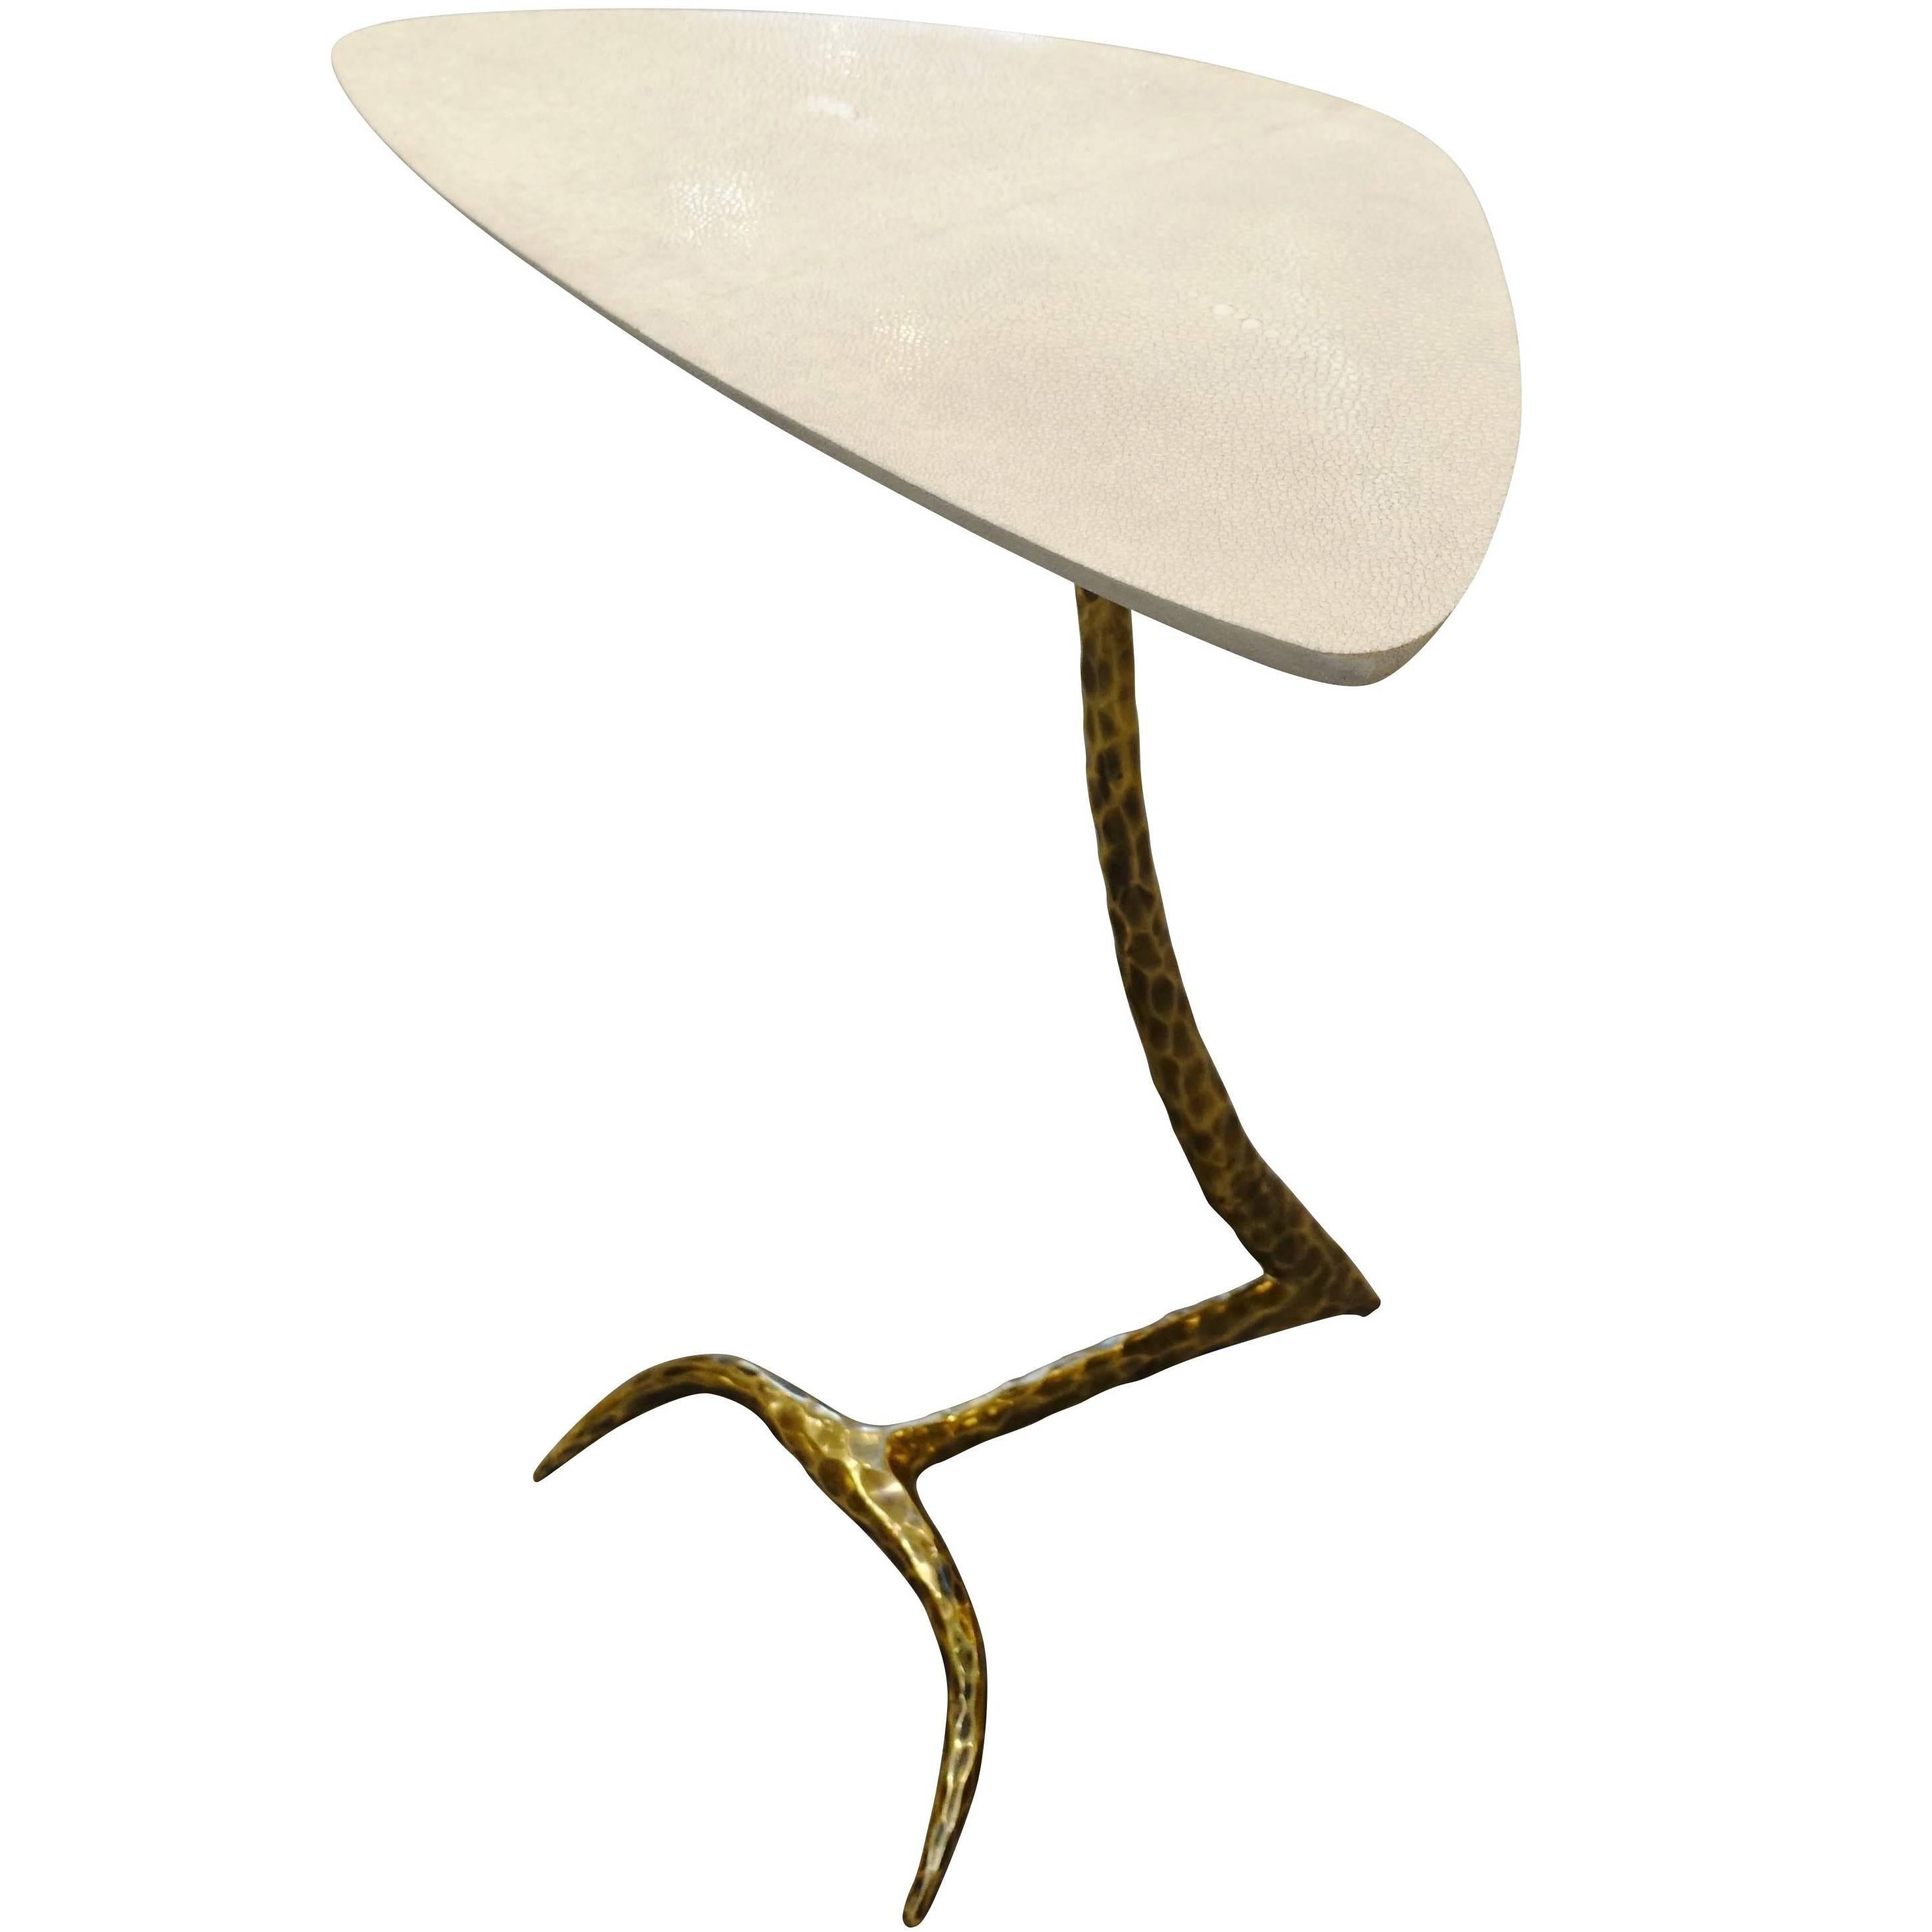 Cream Shagreen Top Cocktail Table, France, Contemporary